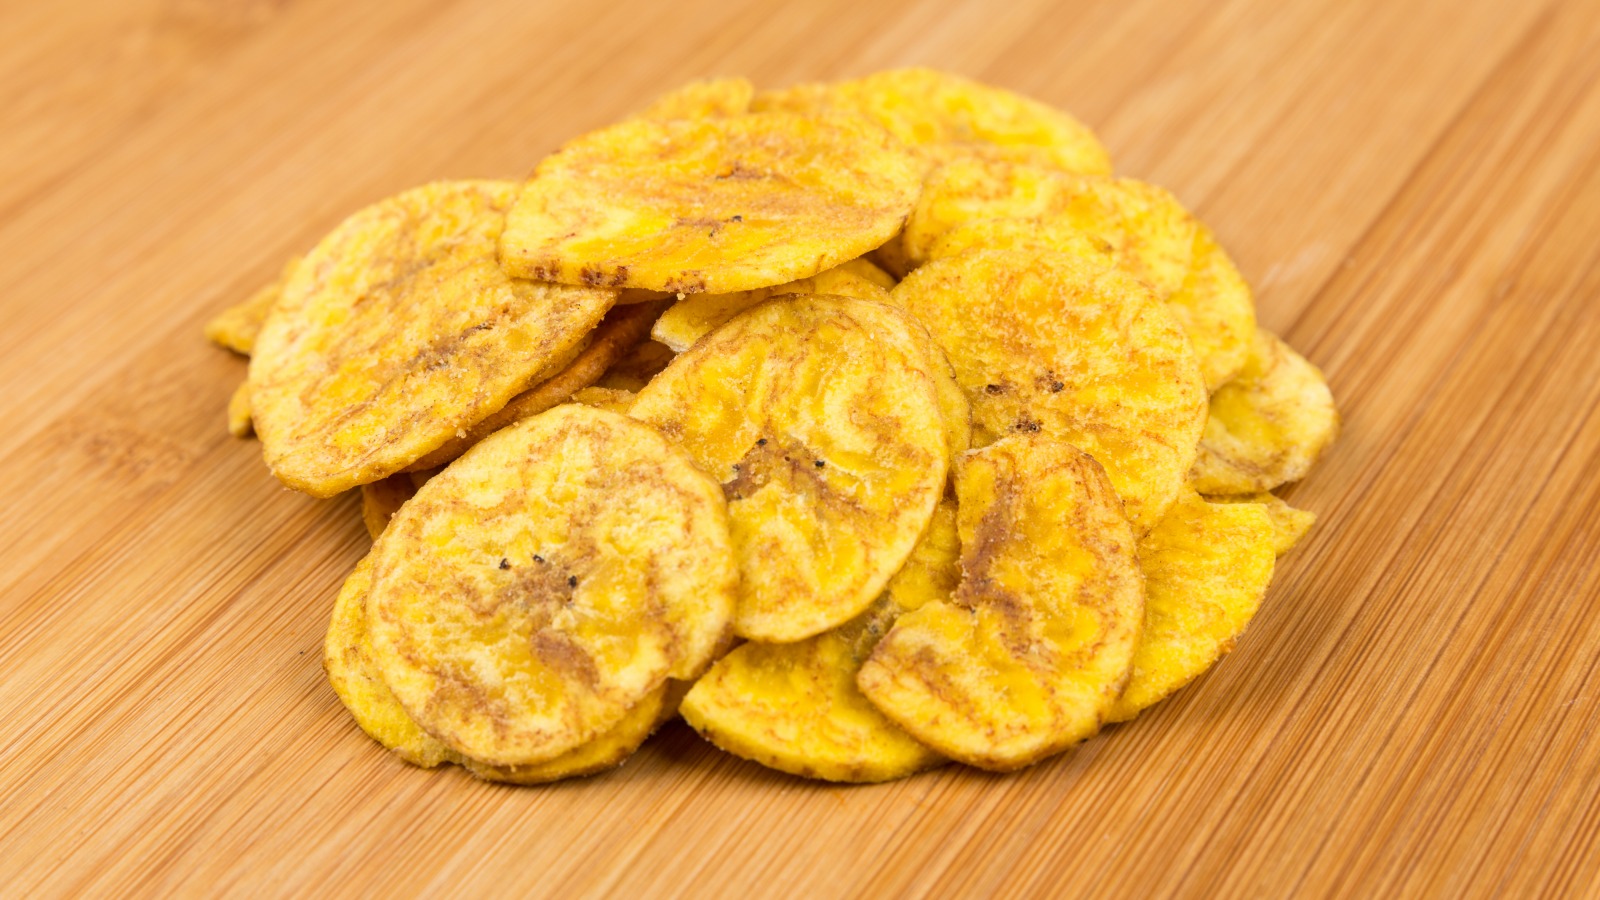 https://www.mashed.com/img/gallery/are-plantain-chips-really-better-for-you-than-potato-chips/l-intro-1604612294.jpg